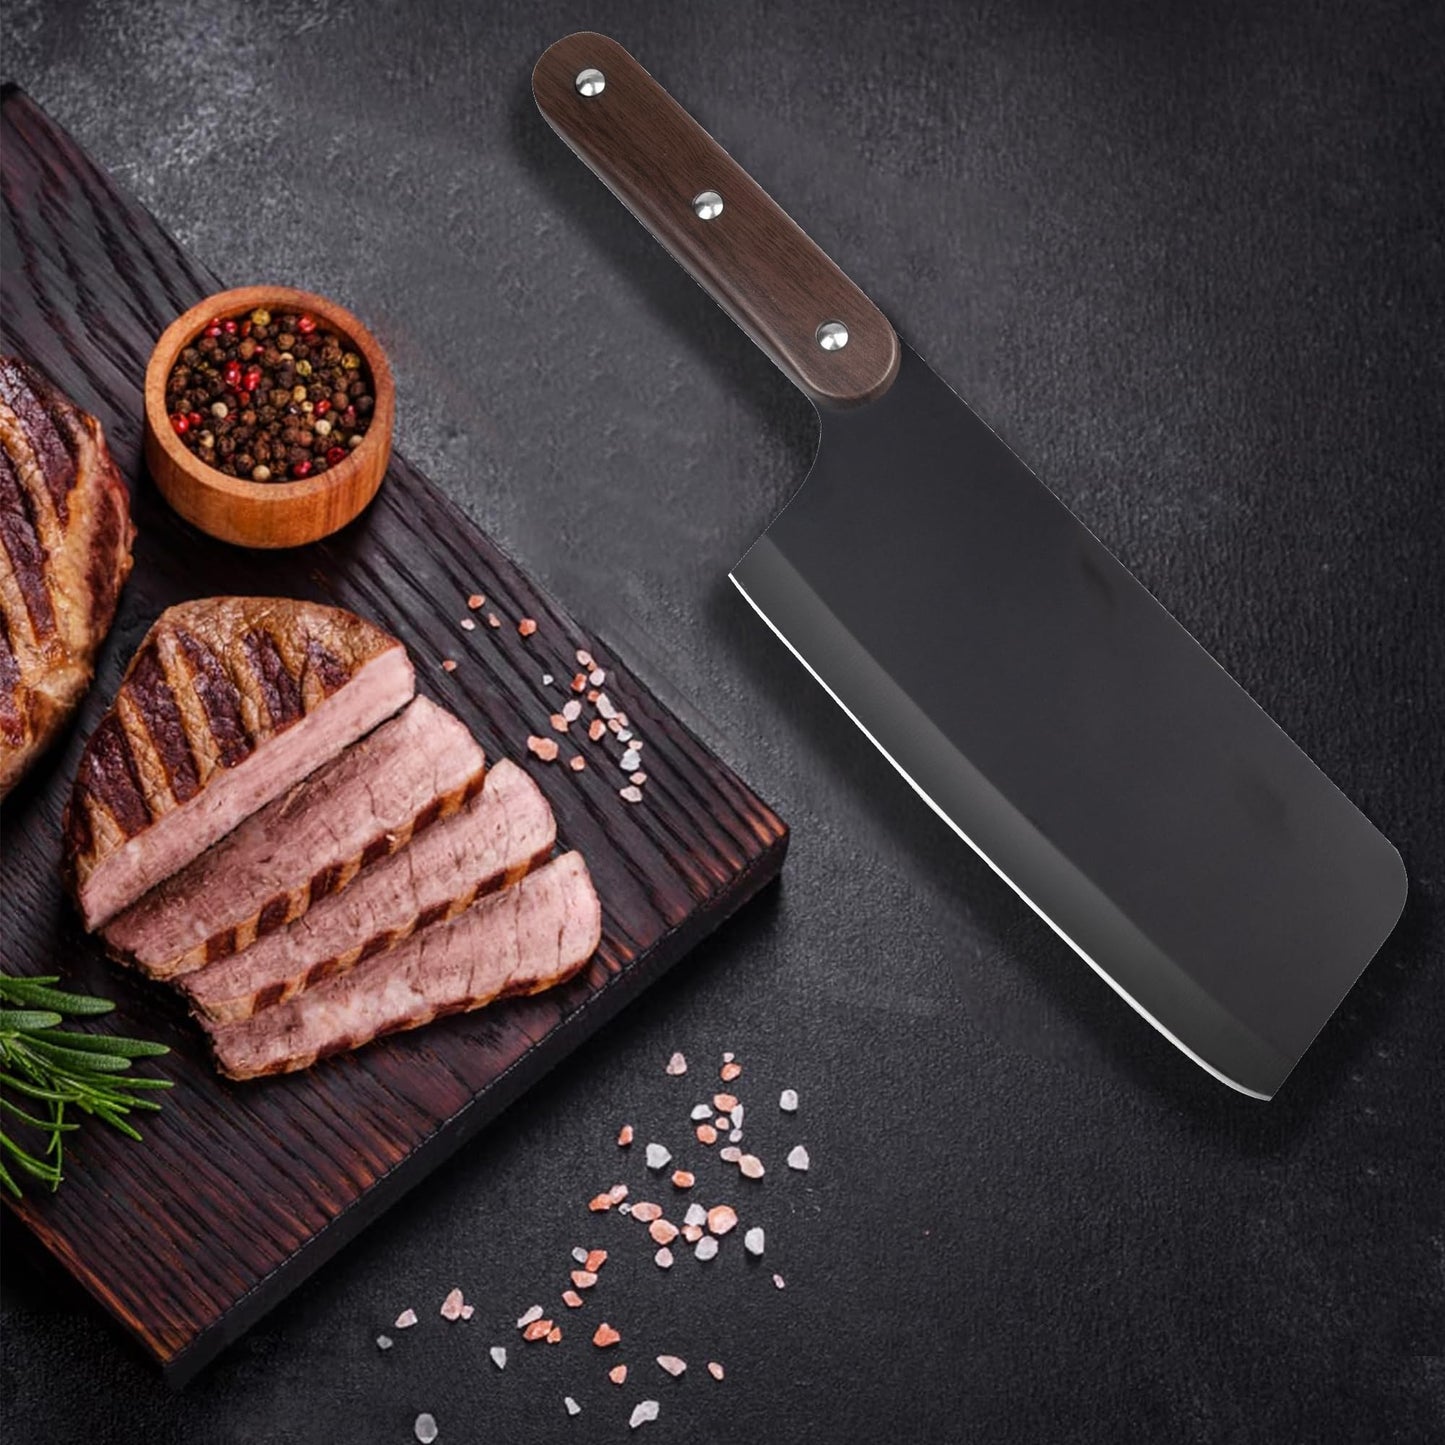 Kitory Vegetable Cleaver, 6.7-inch, Chinese Chef Knife with Ergonomic Handle and Premium 2023 Gifts For Women and Men.